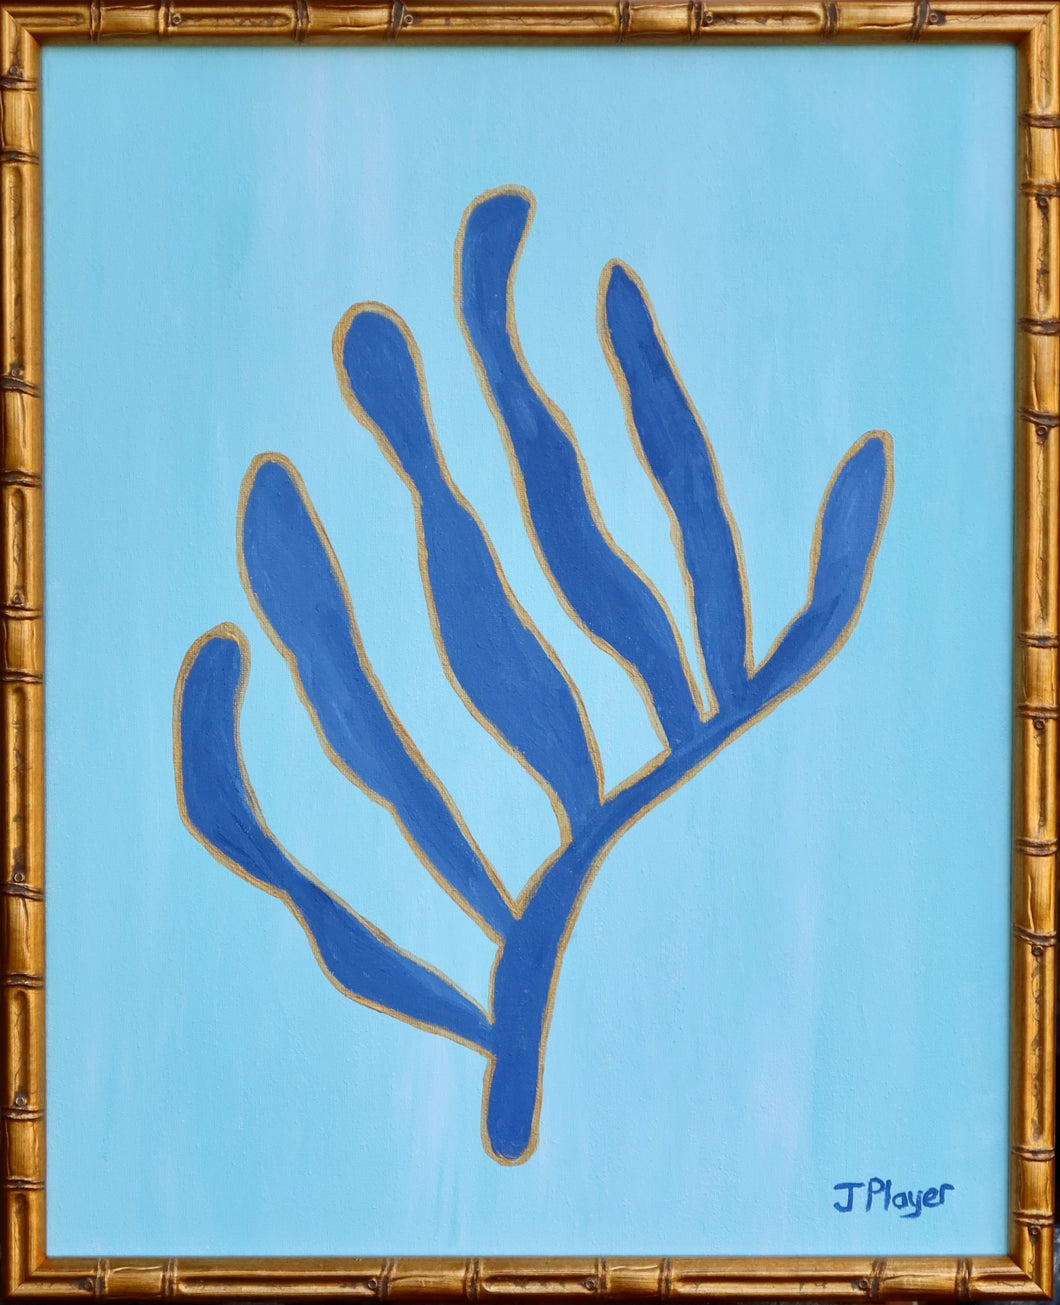 Navy Blue seaweed shape outlined in gold on light blue background. This preppy vertical painting is in a gold bamboo frame. Signed by the artist on the front. based on Matisse's famous cut outs.